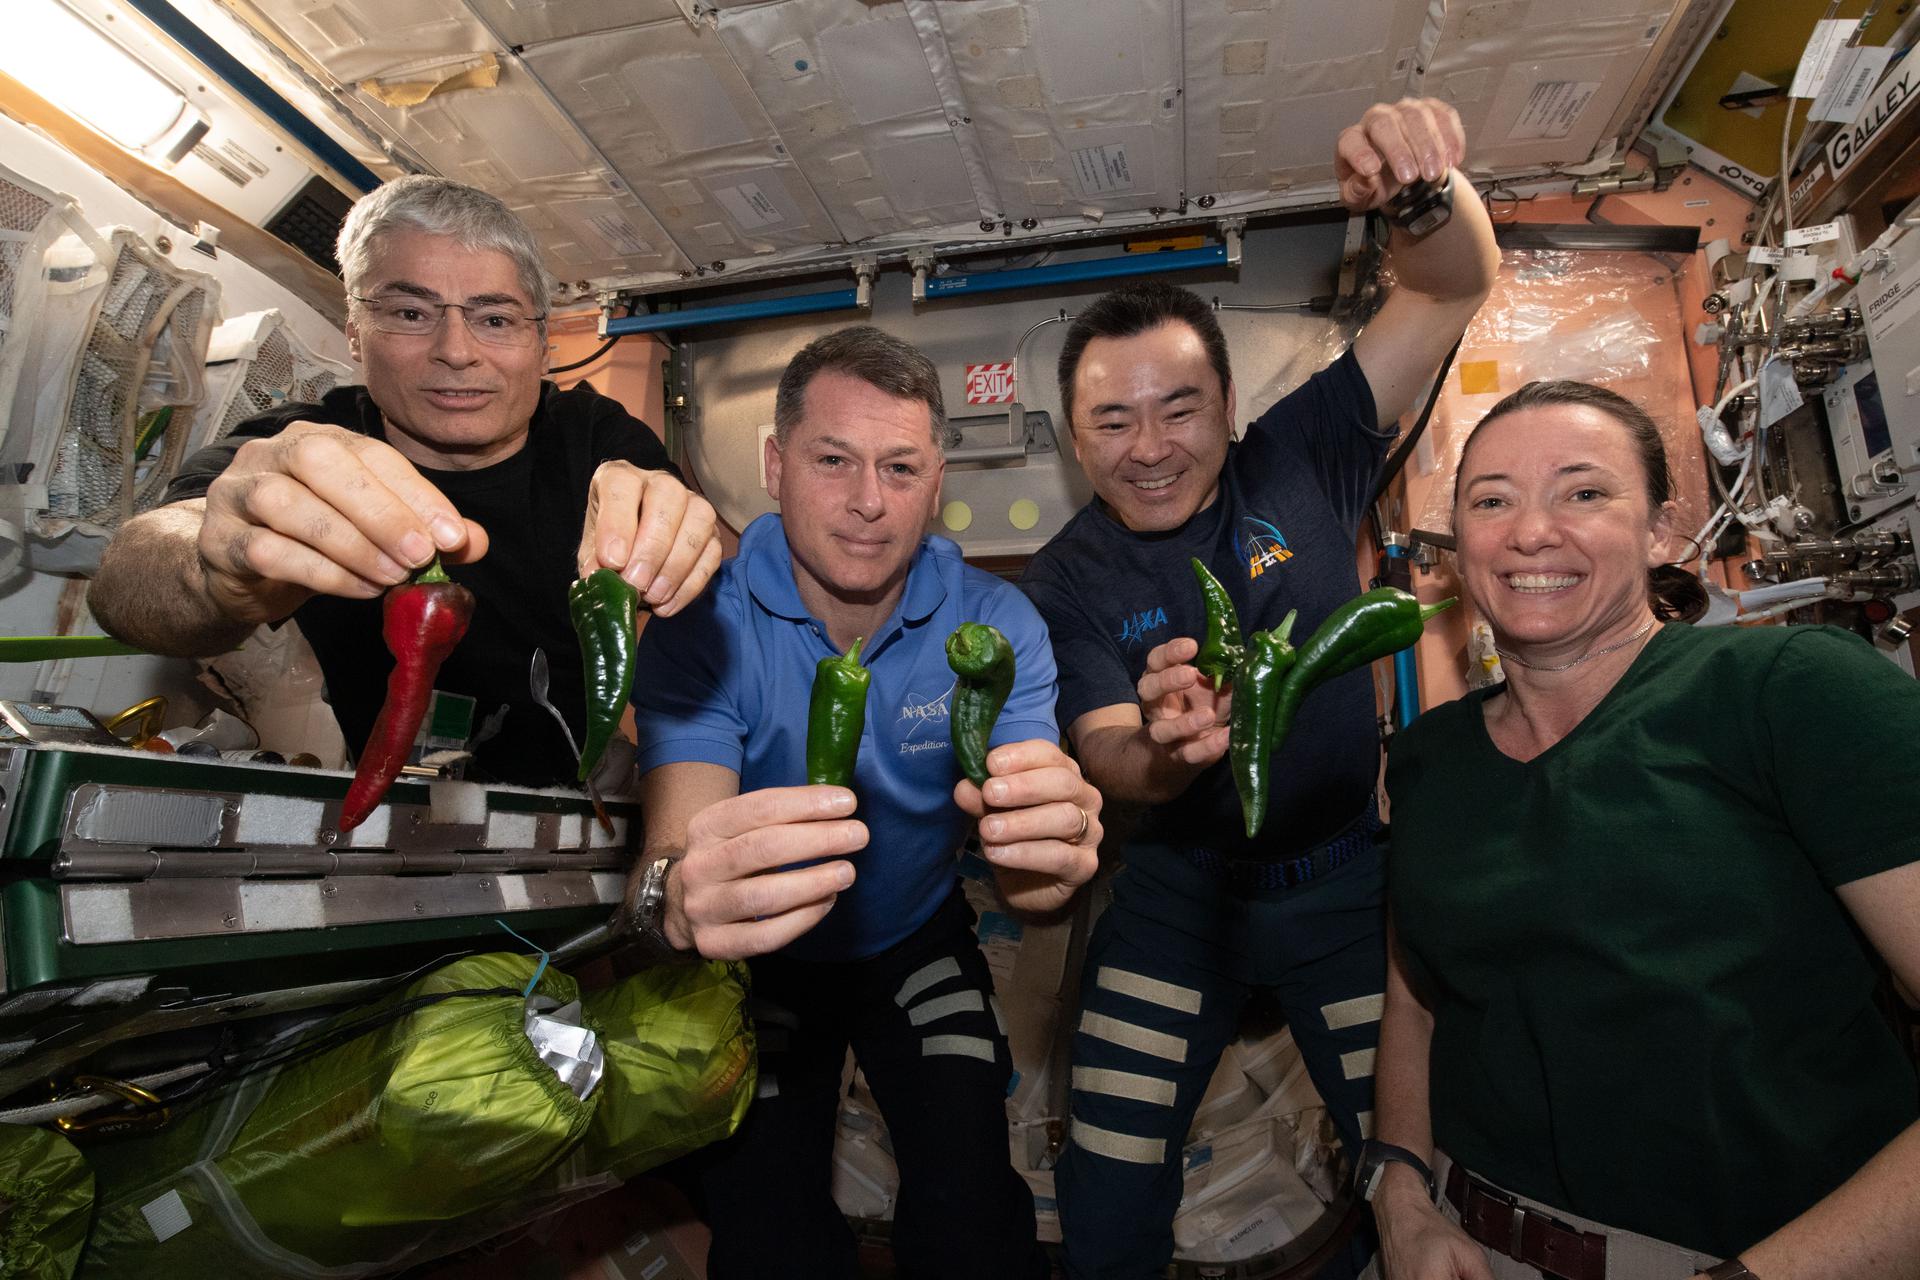 Expedition 66 astronauts sample chile peppers grown on the International Space Station NASA ID: iss066e023260 iss066e023260 (October 29, 2021) -- Expedition 66 astronauts are pictured with the first harvest of chile peppers grown aboard the International Space Station as part of the Plant Habitat-04 investigation. The chile peppers started growing on July 12, 2021, and represent one of the longest and most challenging plant experiments attempted aboard the orbiting laboratory. The chile peppers started growing on July 12, 2021, and represent one of the longest and most challenging plant experiments attempted aboard the orbiting laboratory. NASA astronaut and Expedition 66 flight engineer Mark Vande Hei conducted the first harvest of the pepper crop on October 29, 2021. Crew members sanitized the peppers and completed a scientific survey after their taste test. The Crew-3 astronauts will take over the crop when they arrive at the orbiting laboratory, and will conduct a final harvest of the peppers in late November. They will also sanitize and sample the crop, and complete surveys. Some peppers and their leaves from the final harvest will return to Earth for further analysis. What we learn will inform future crop growth and food supplementation activities for deep space exploration. Pictured, from left, are Expedition 66 flight engineers NASA astronauts Mark Vande Hei and Shane Kimbrough, JAXA (Japan Aerospace Exploration) astronaut Aki Hoshide, and NASA astronaut Megan McArthur.